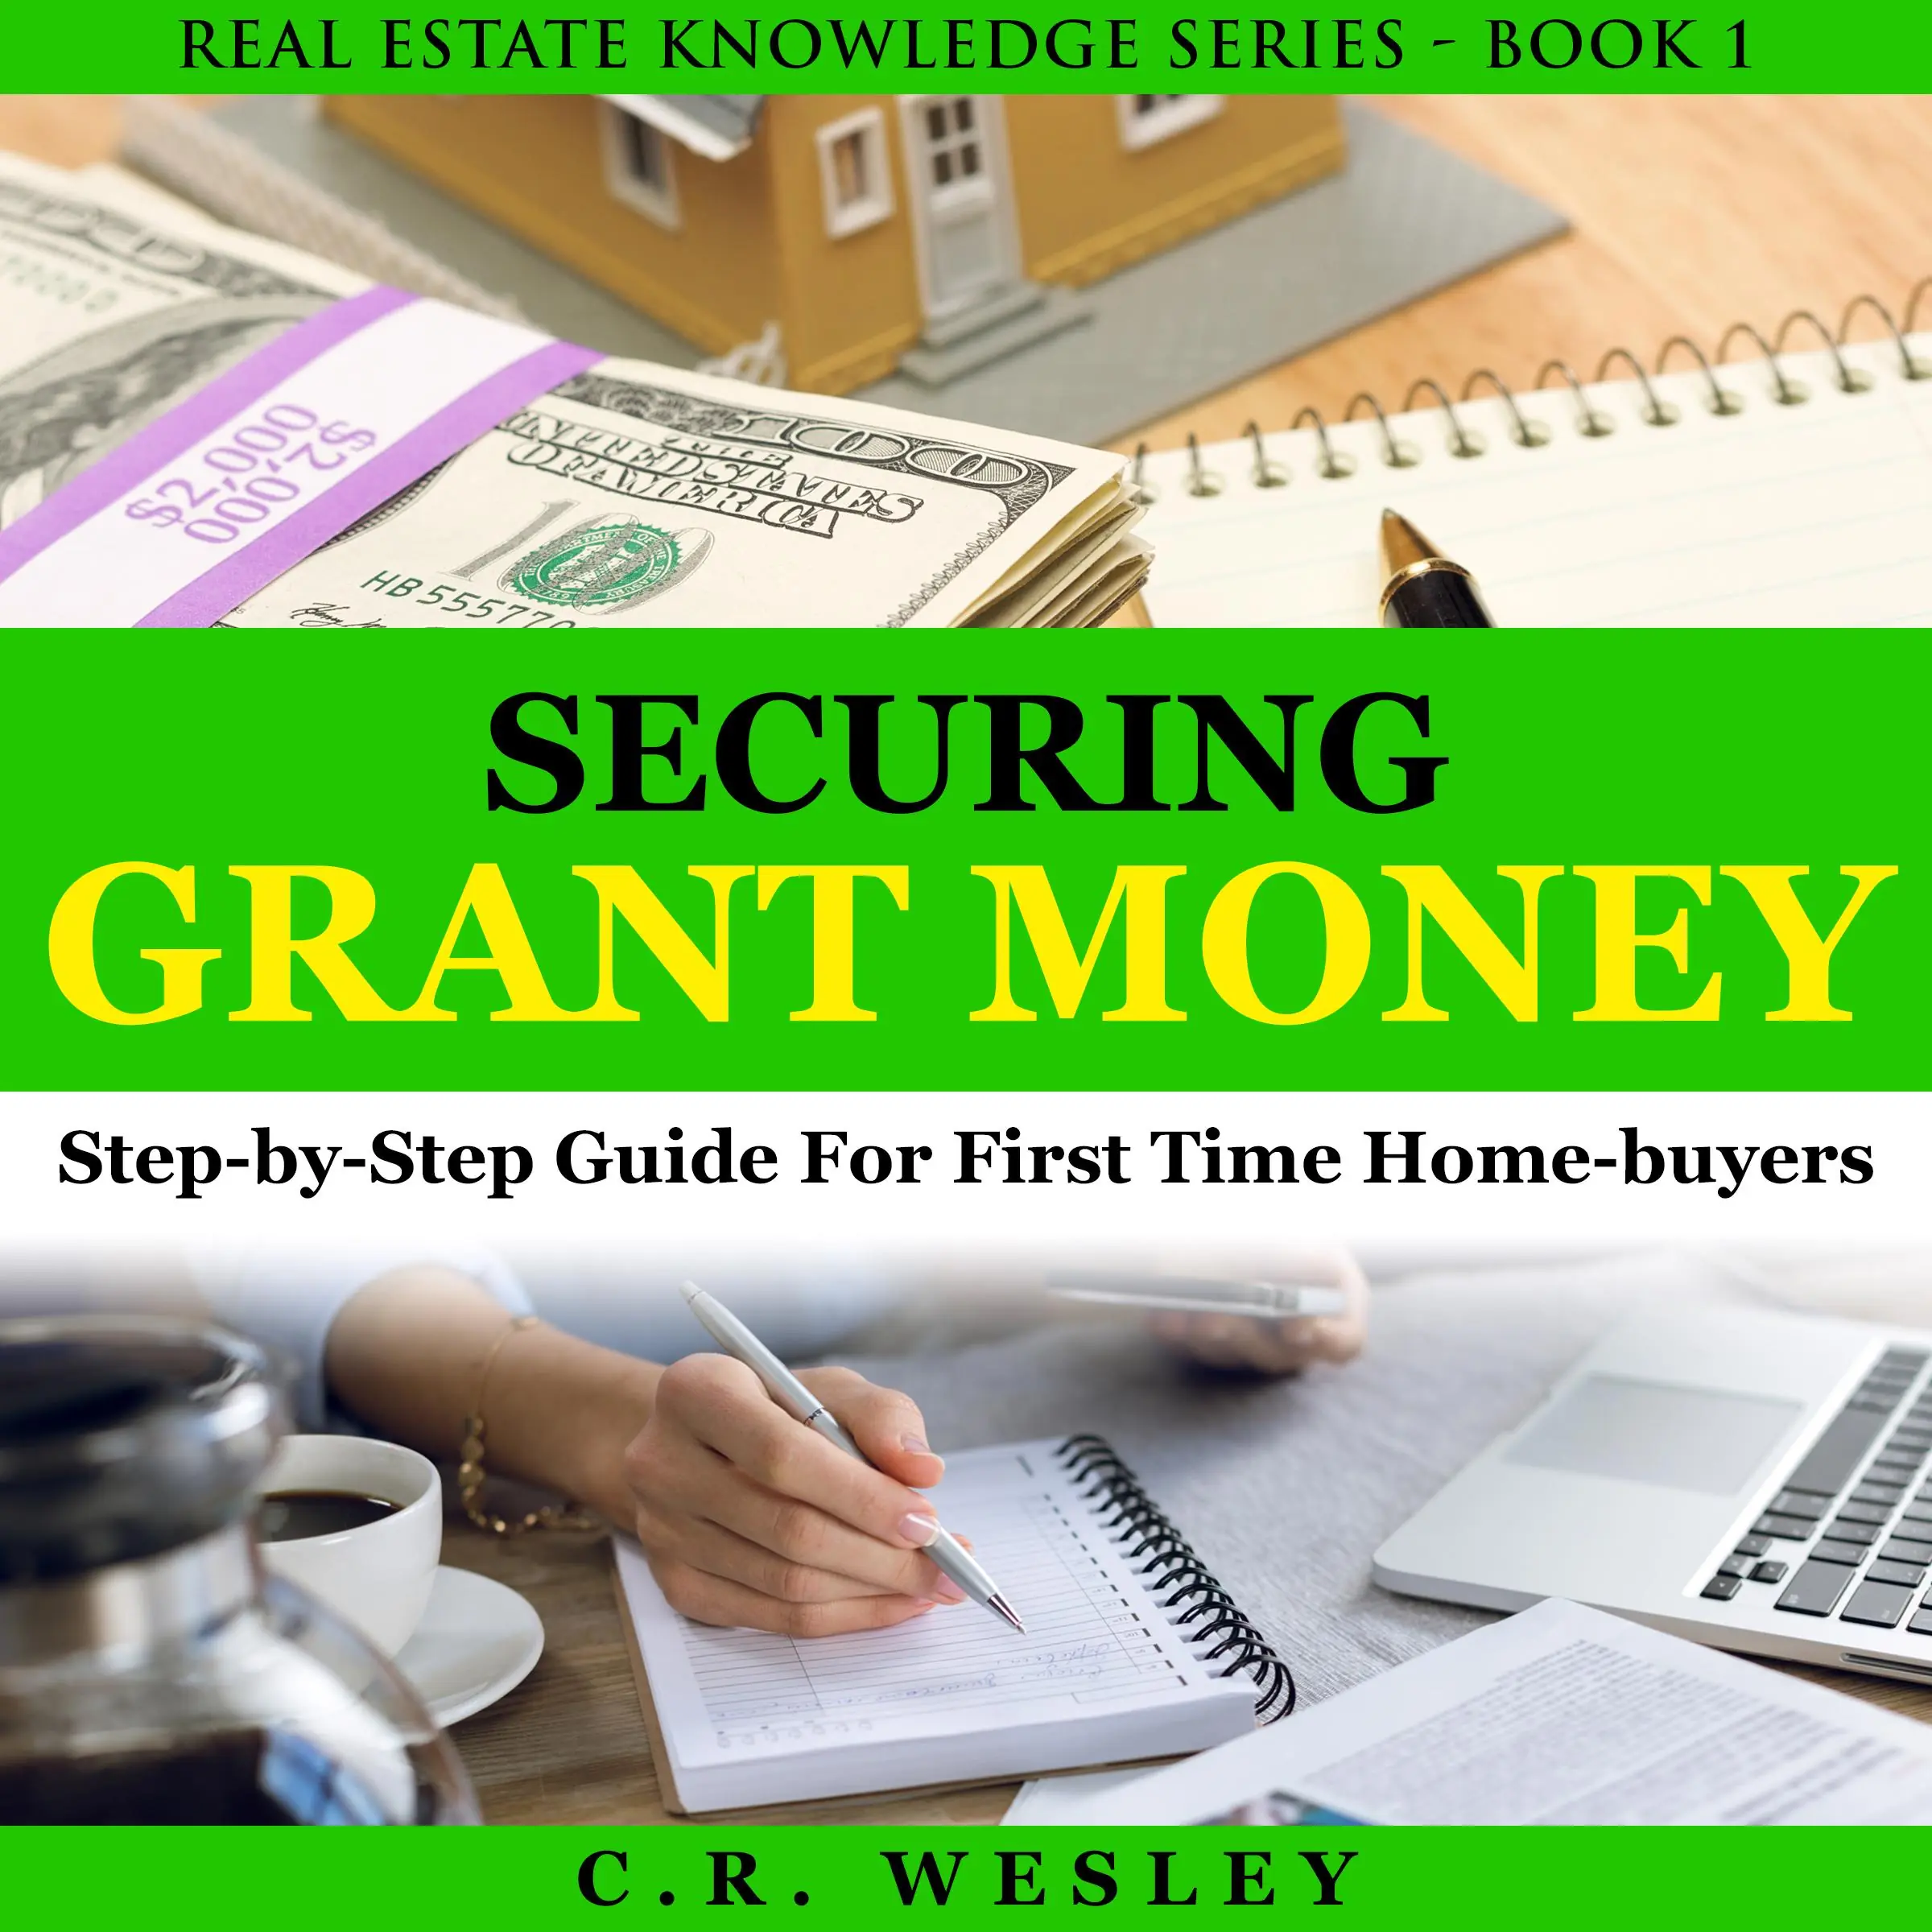 Securing Grant Money Audiobook by C.R. Wesley